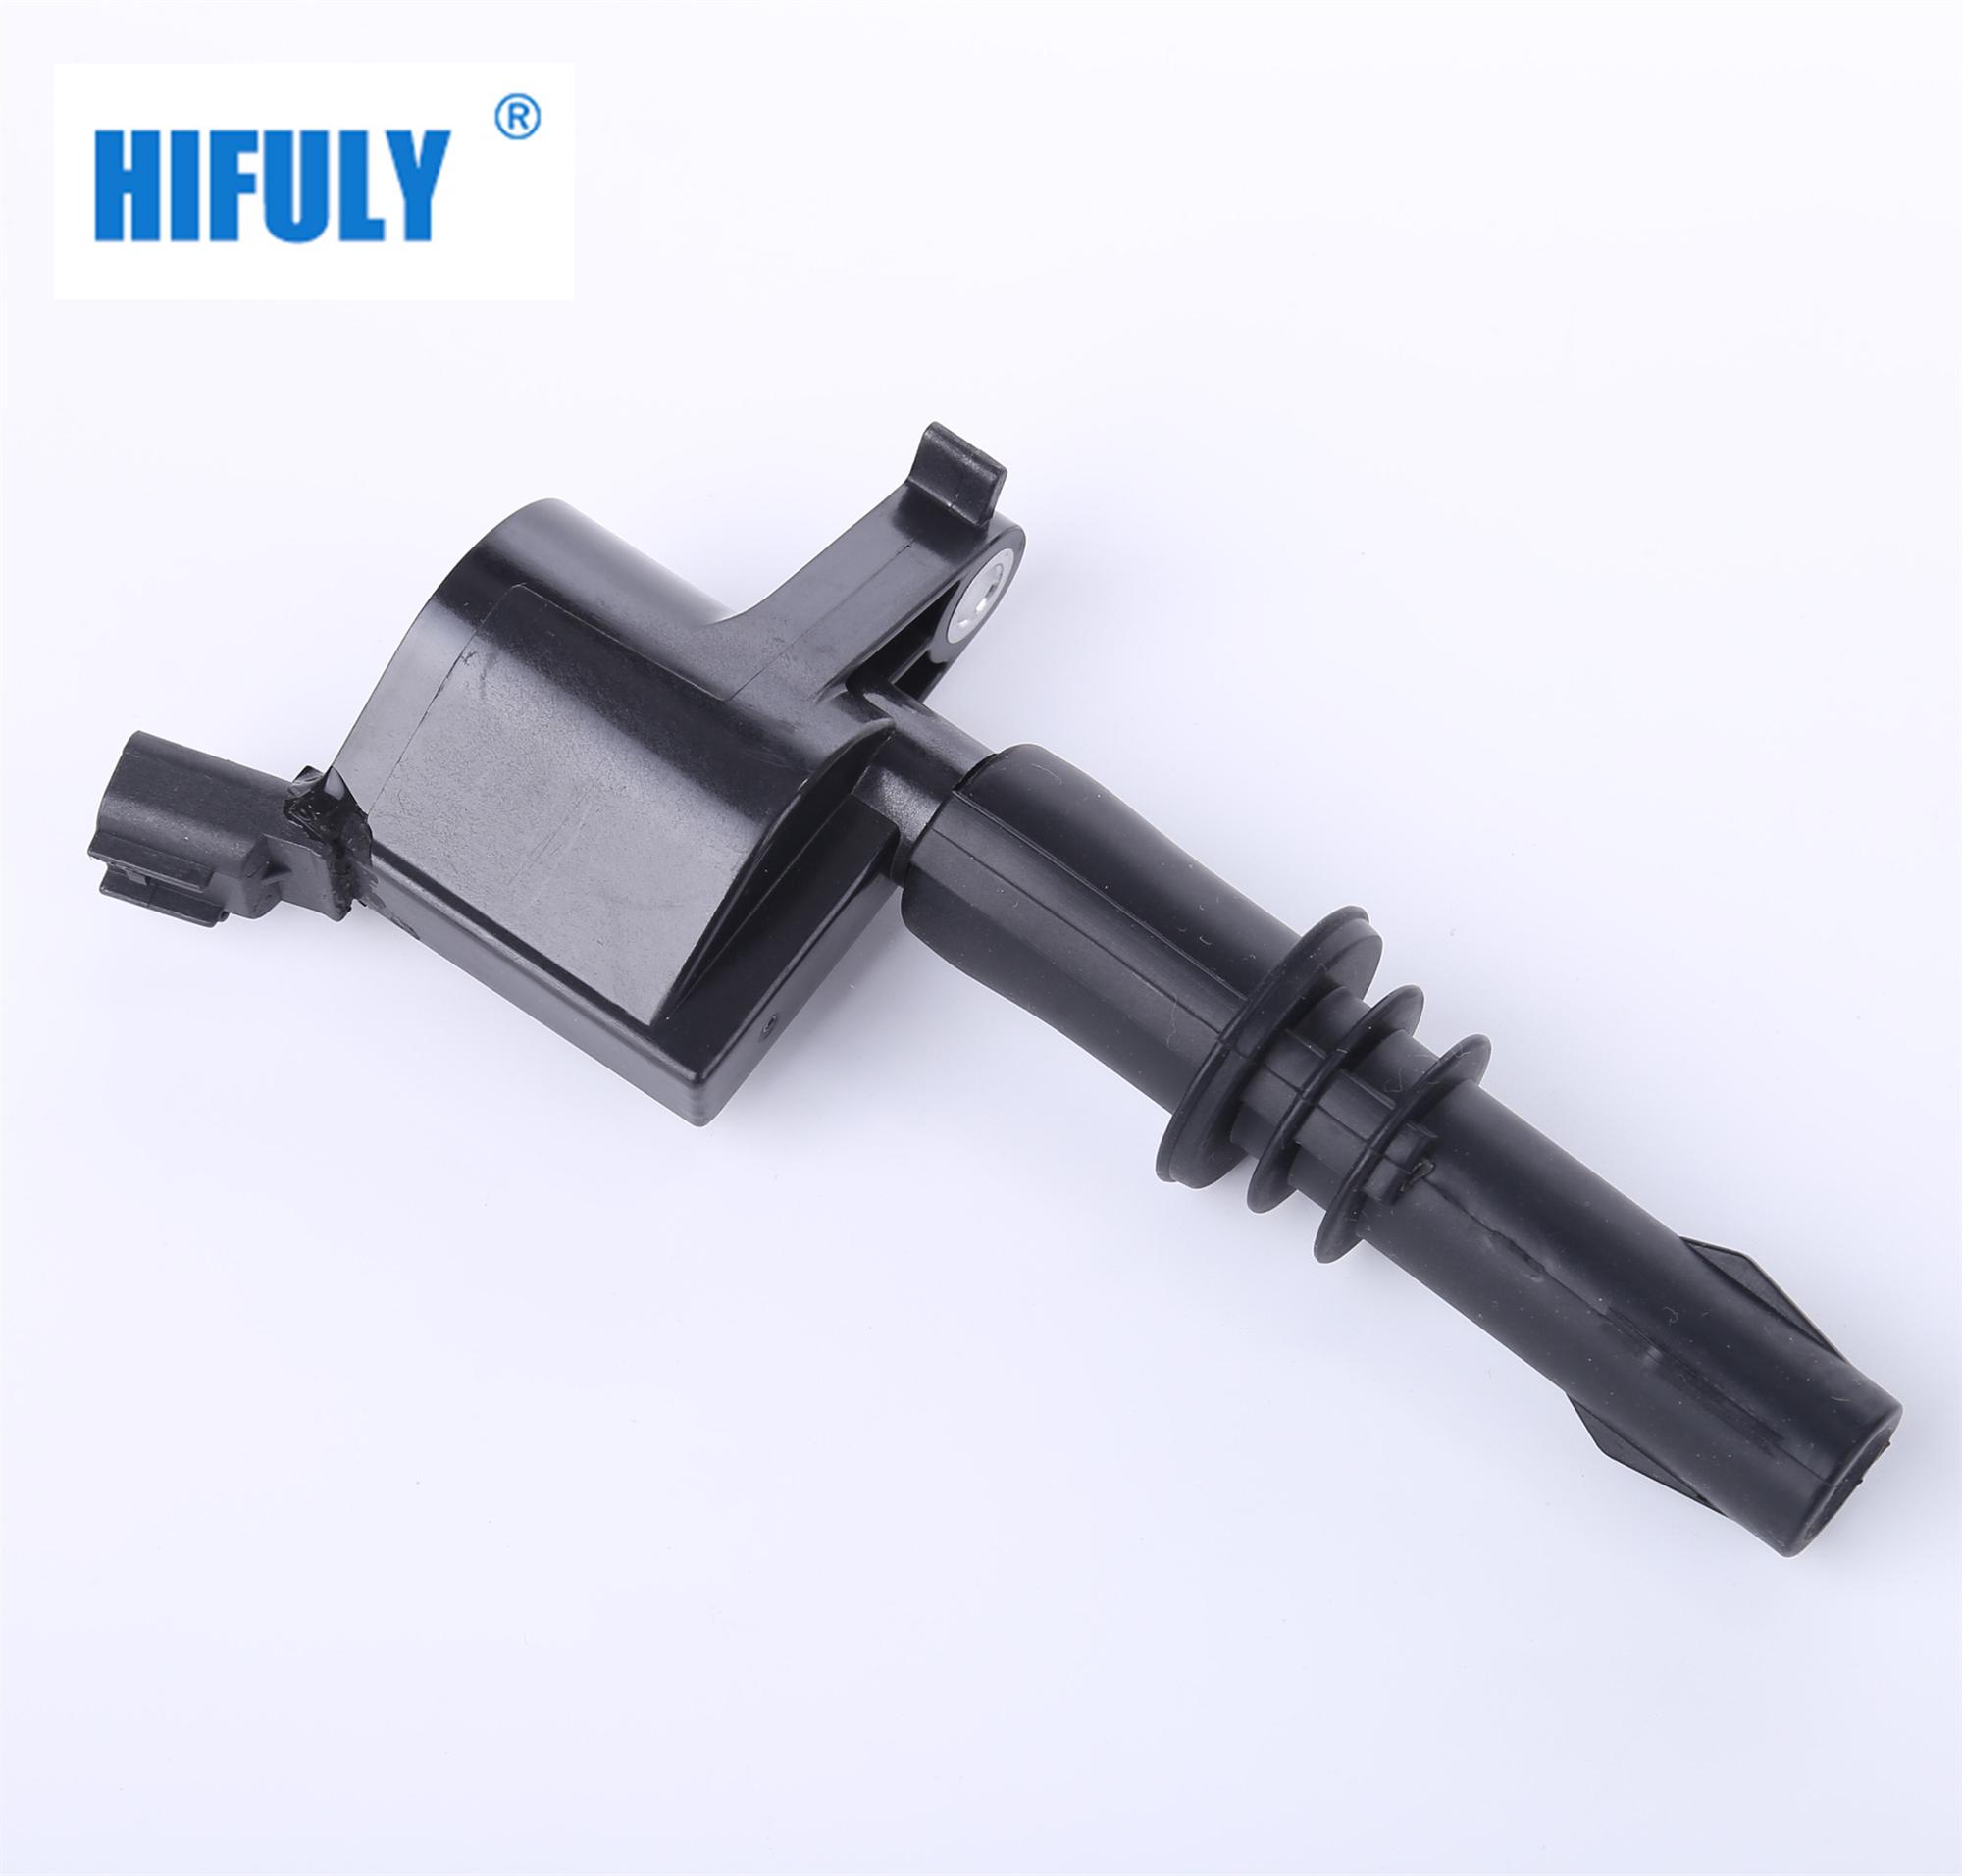 IGNITION COIL for FORD Expedition F-250 Super Duty Explorer Mustang OEM 8L3E-12A366-AA 0B244206 DG521 8L3Z-12029-A